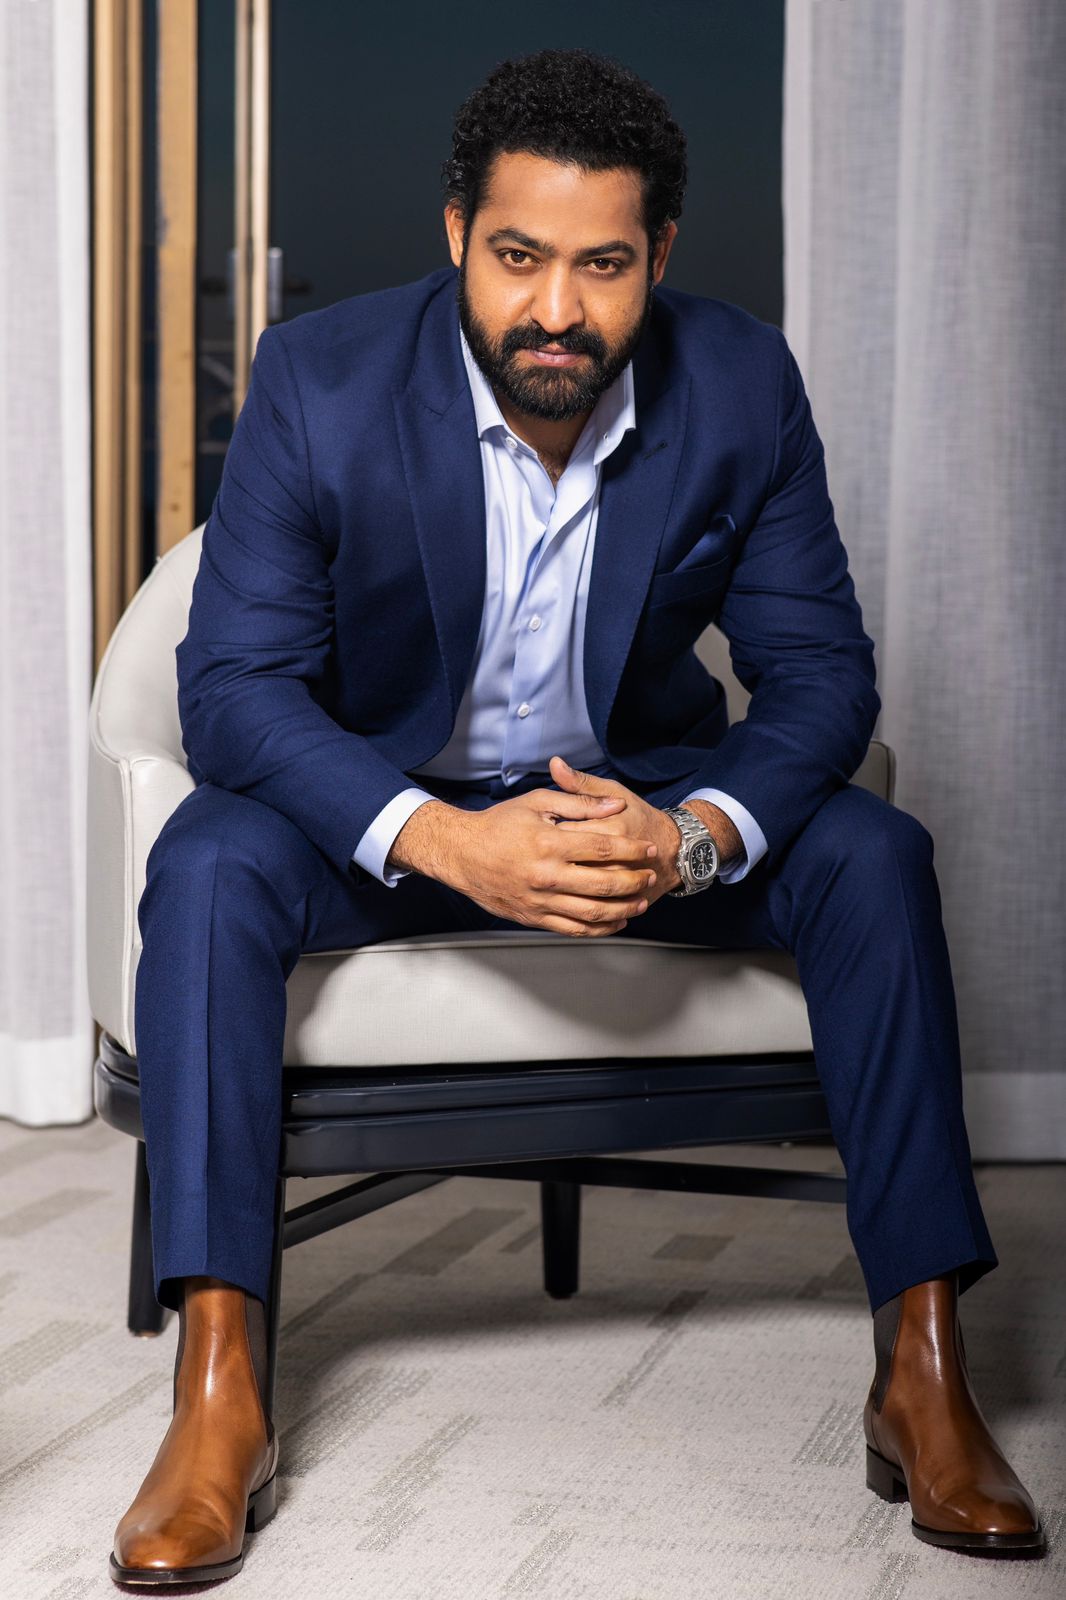 Pic Talk: A Dashing Ntr At South Asian Excellence